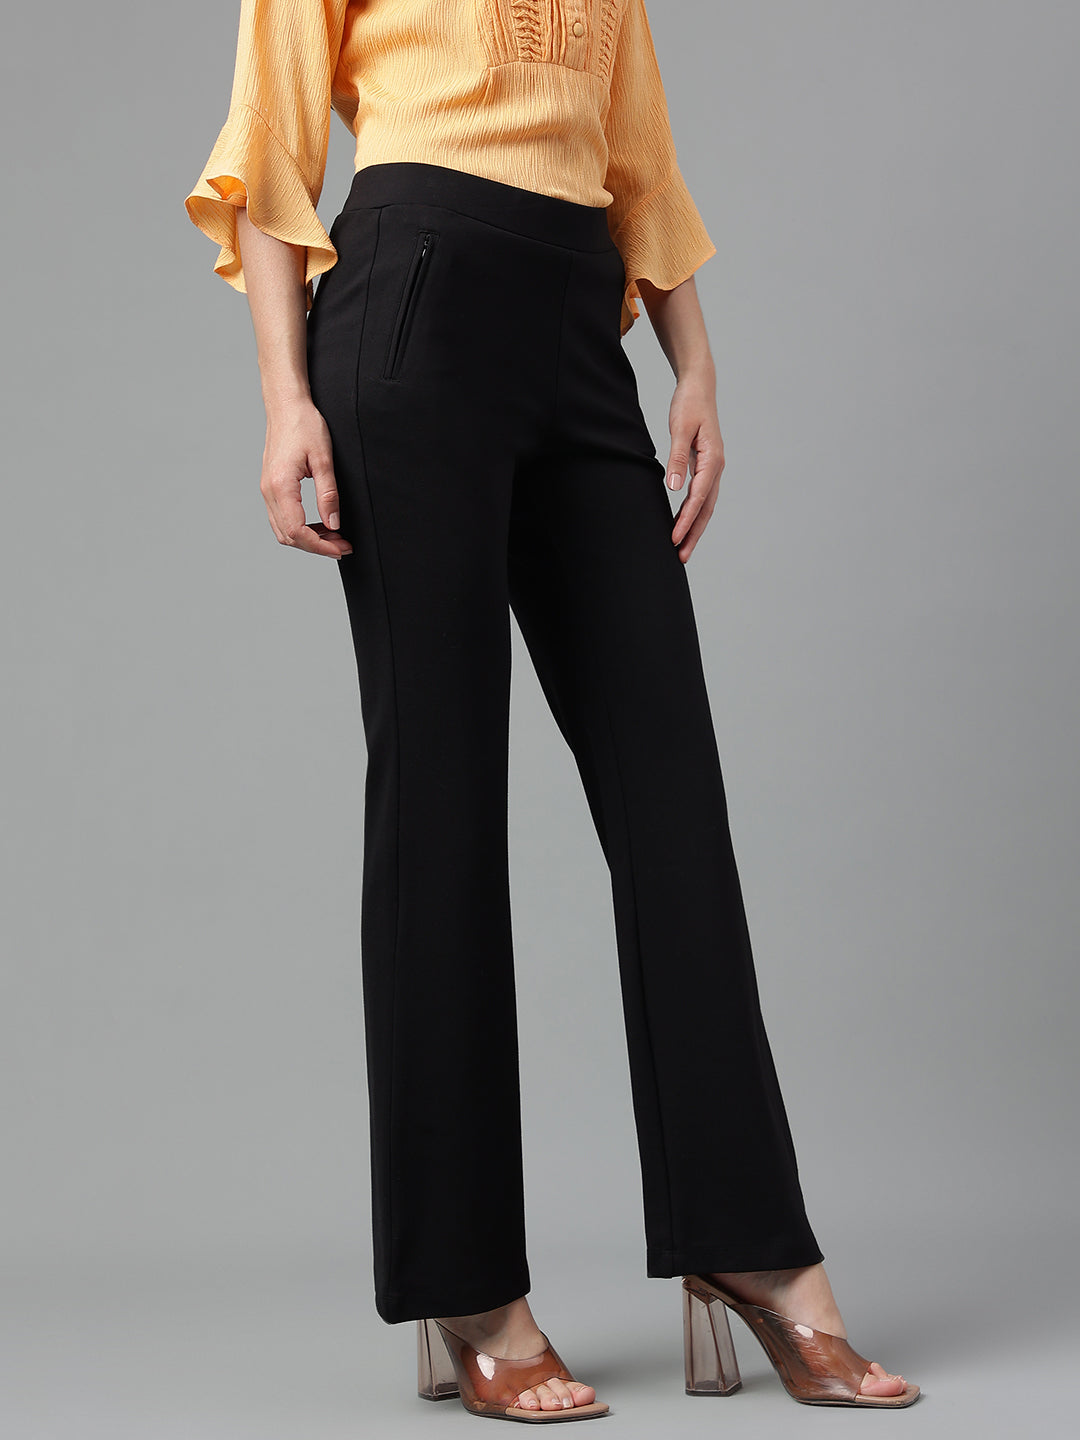 Black Straight Fit Trousers with Pockets For Casual Wear